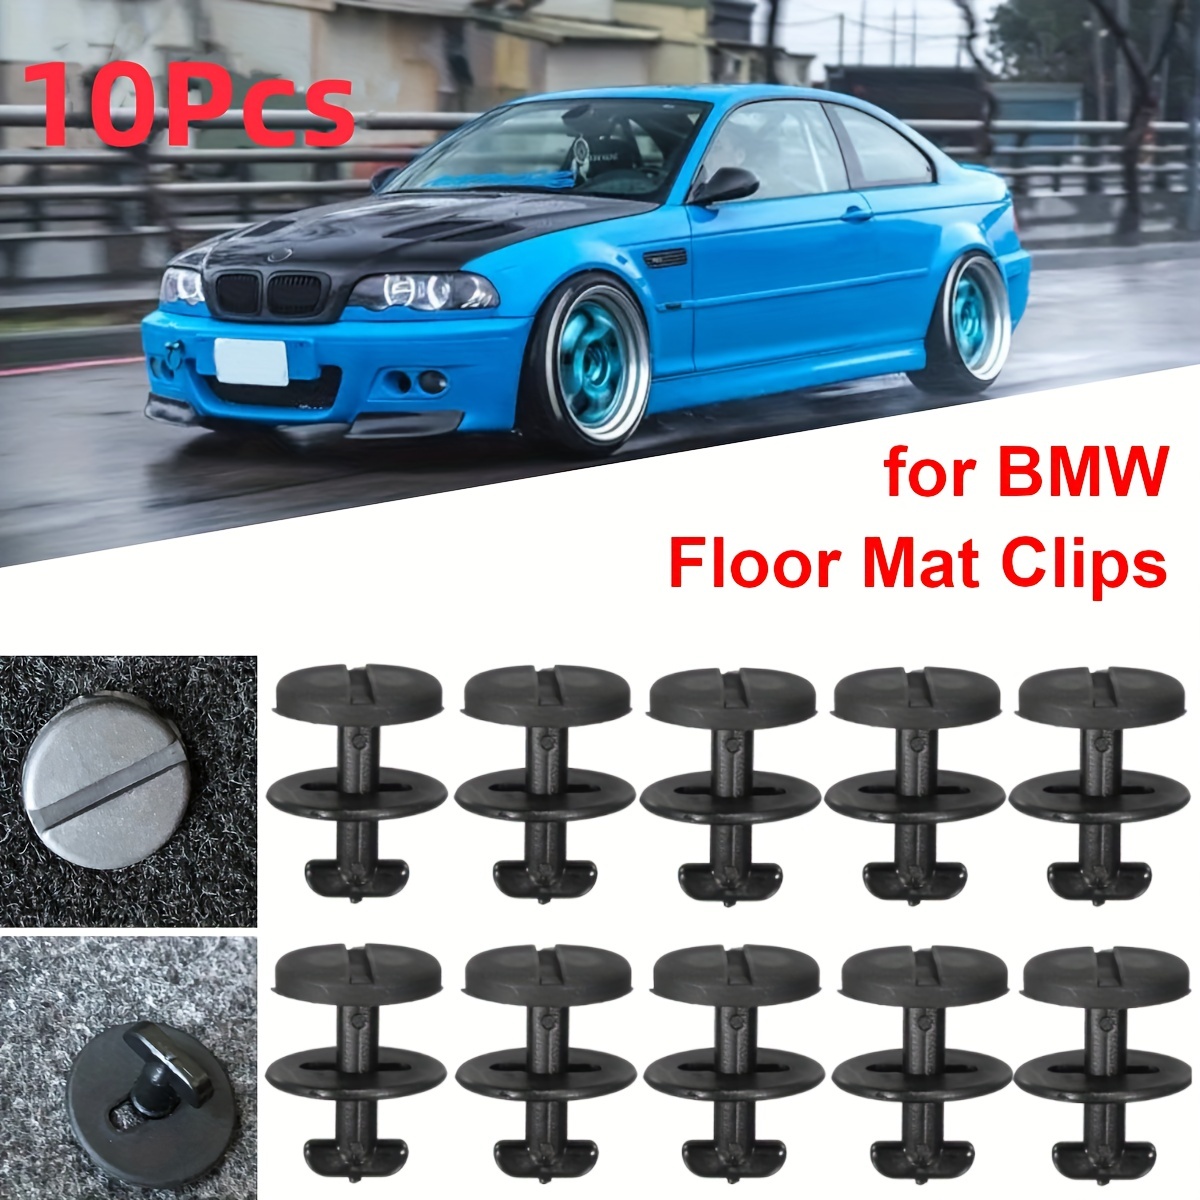 

10pcs Car Floor Mat Clips For Bmw E36 E46 E38 E39 X3 X5 M3 M5 3 5 7 Series - Securely Lock Carpet Mats In Place!